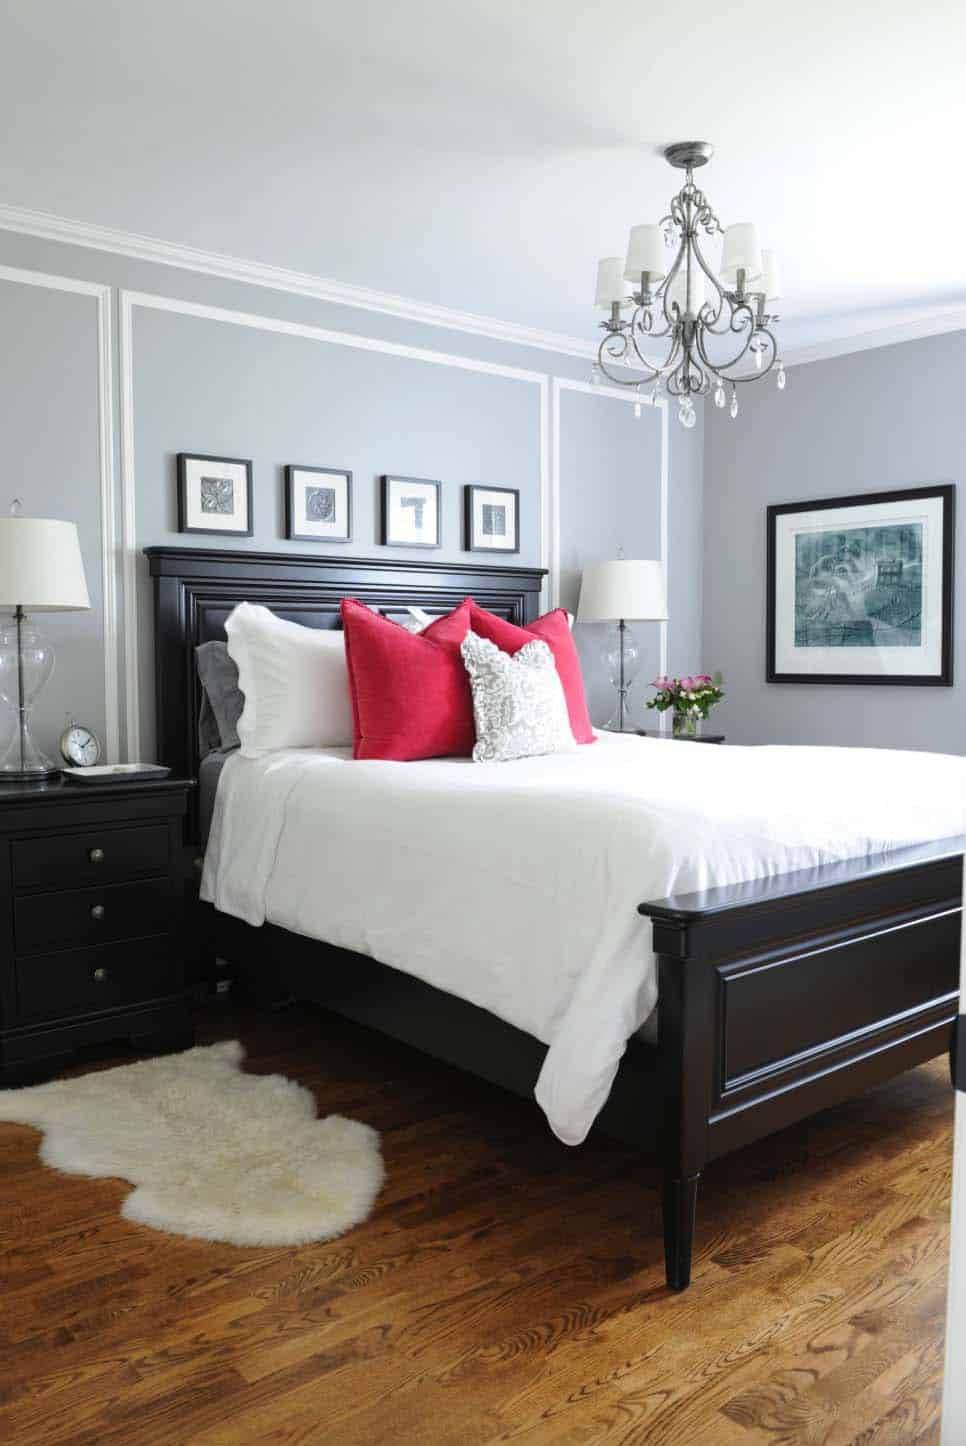 25 Absolutely Stunning Master Bedroom Color Scheme Ideas